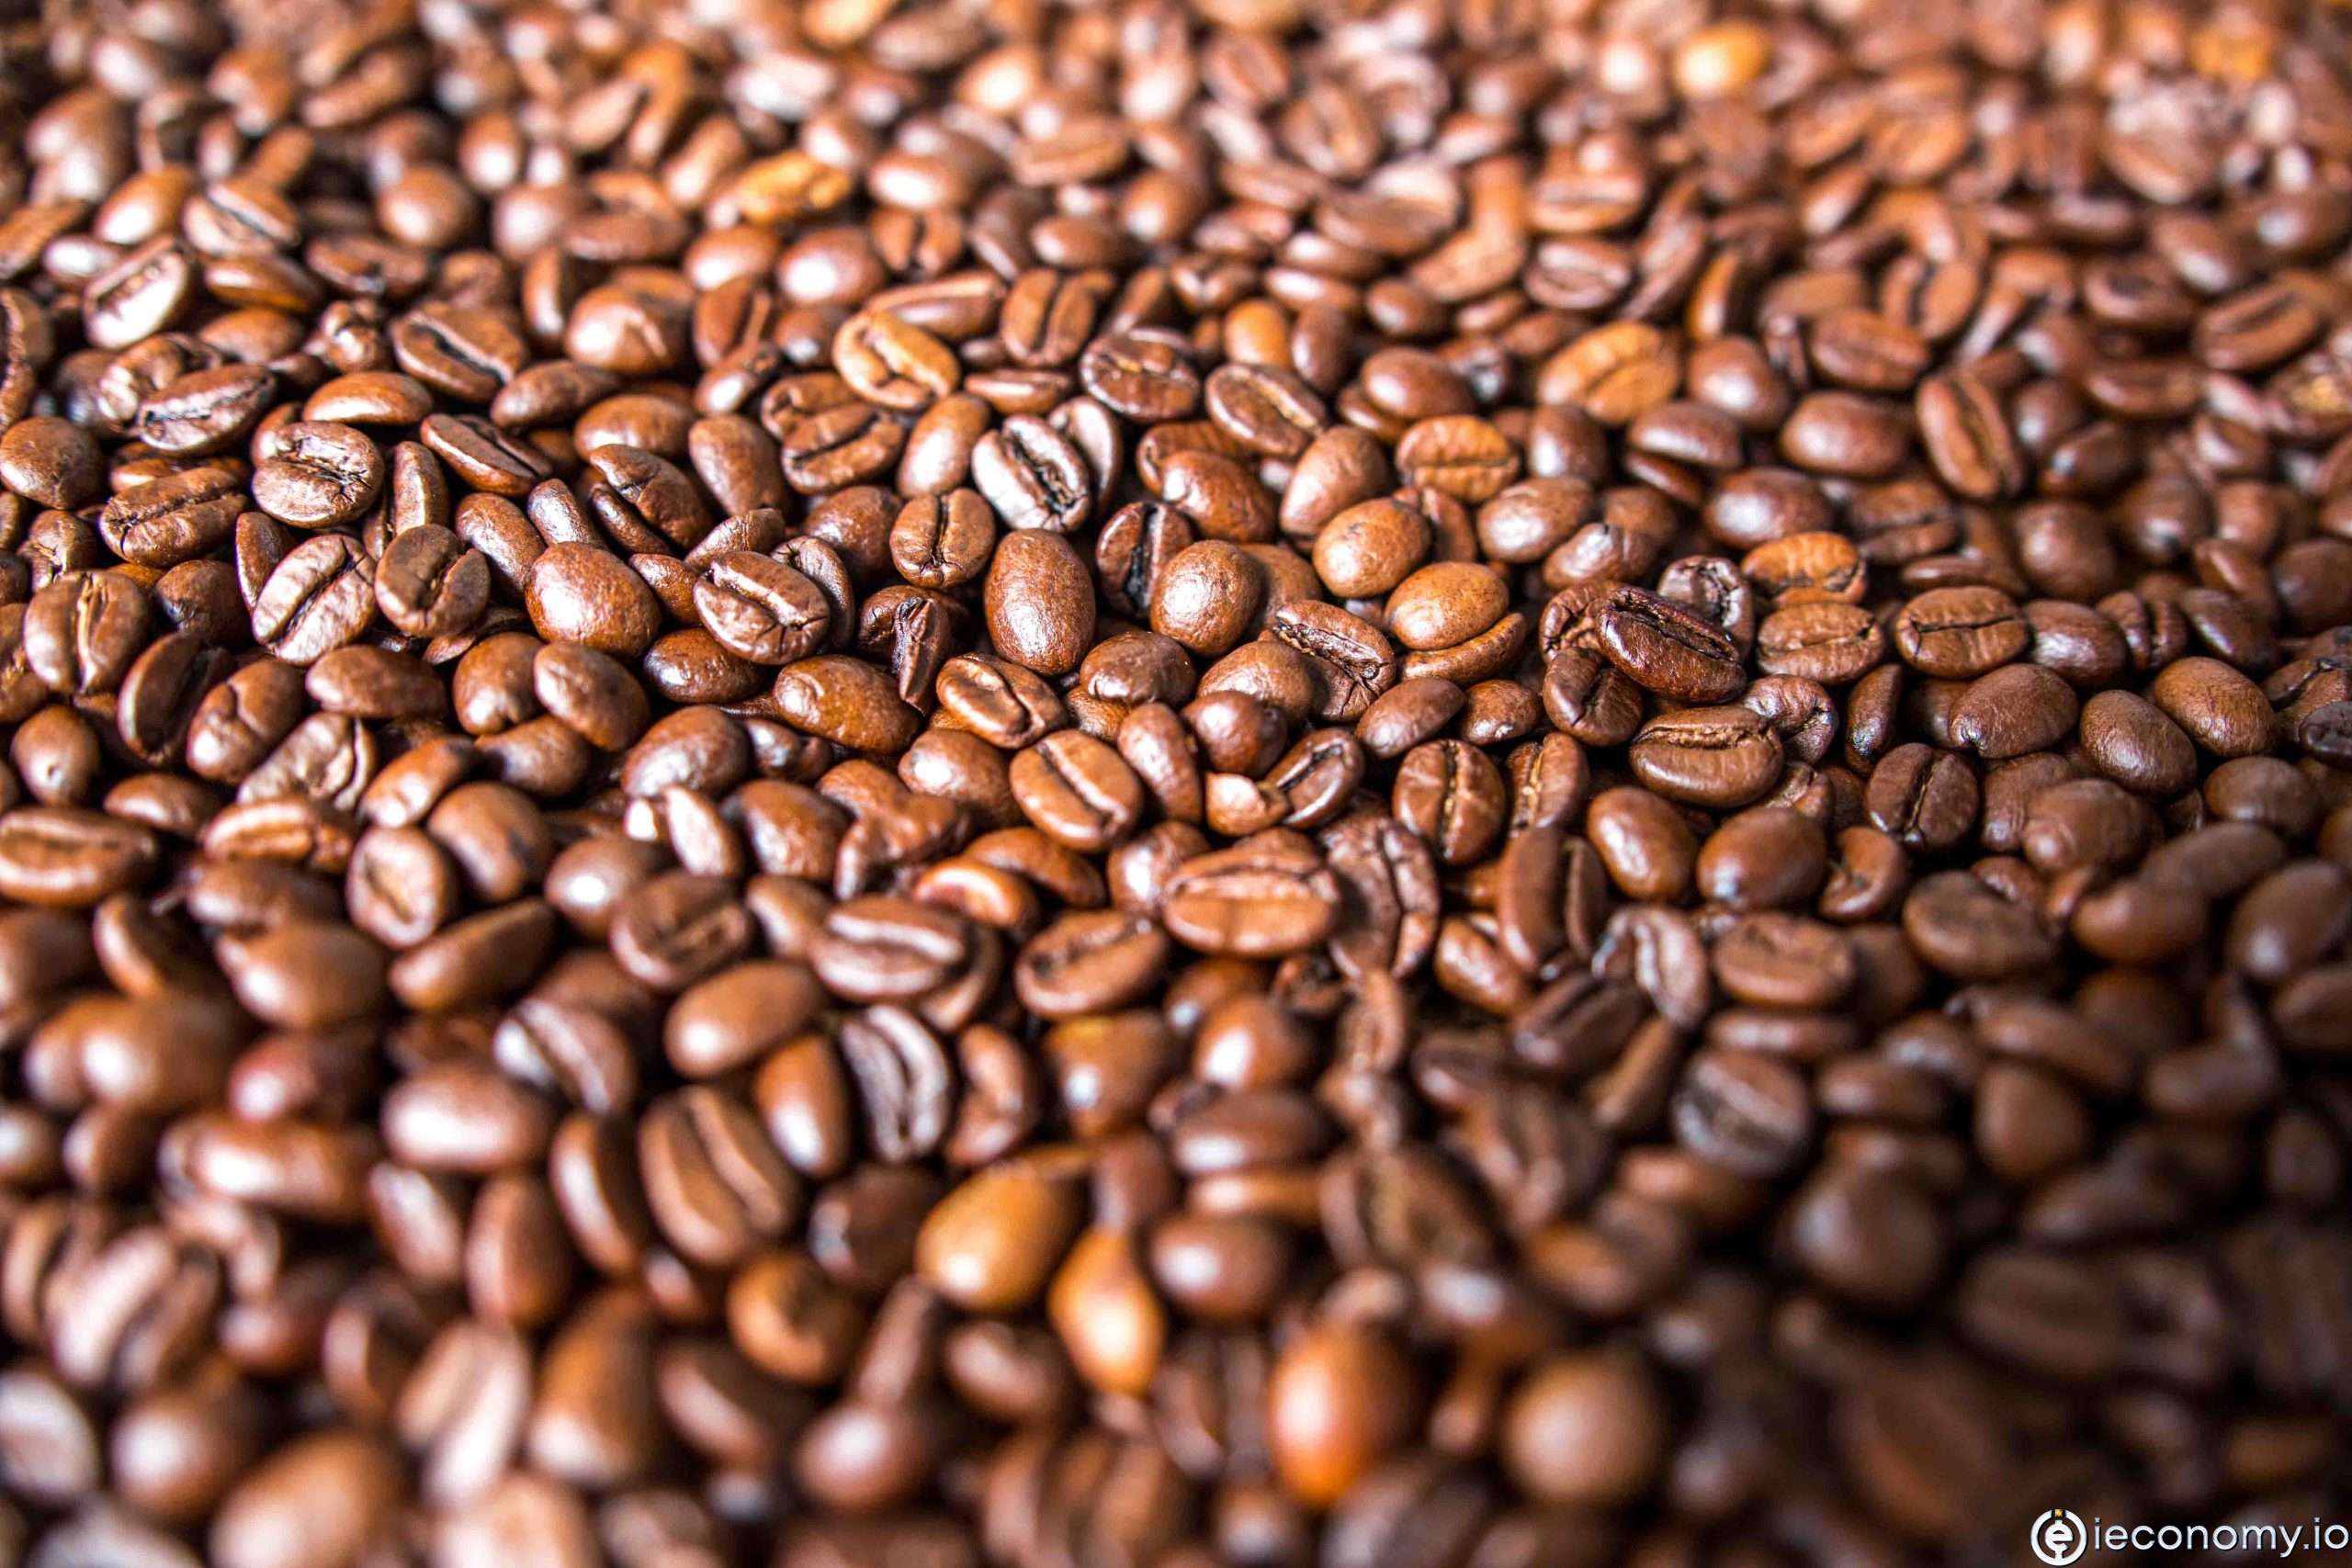 The price of coffee has risen to a ten-year high in recent days